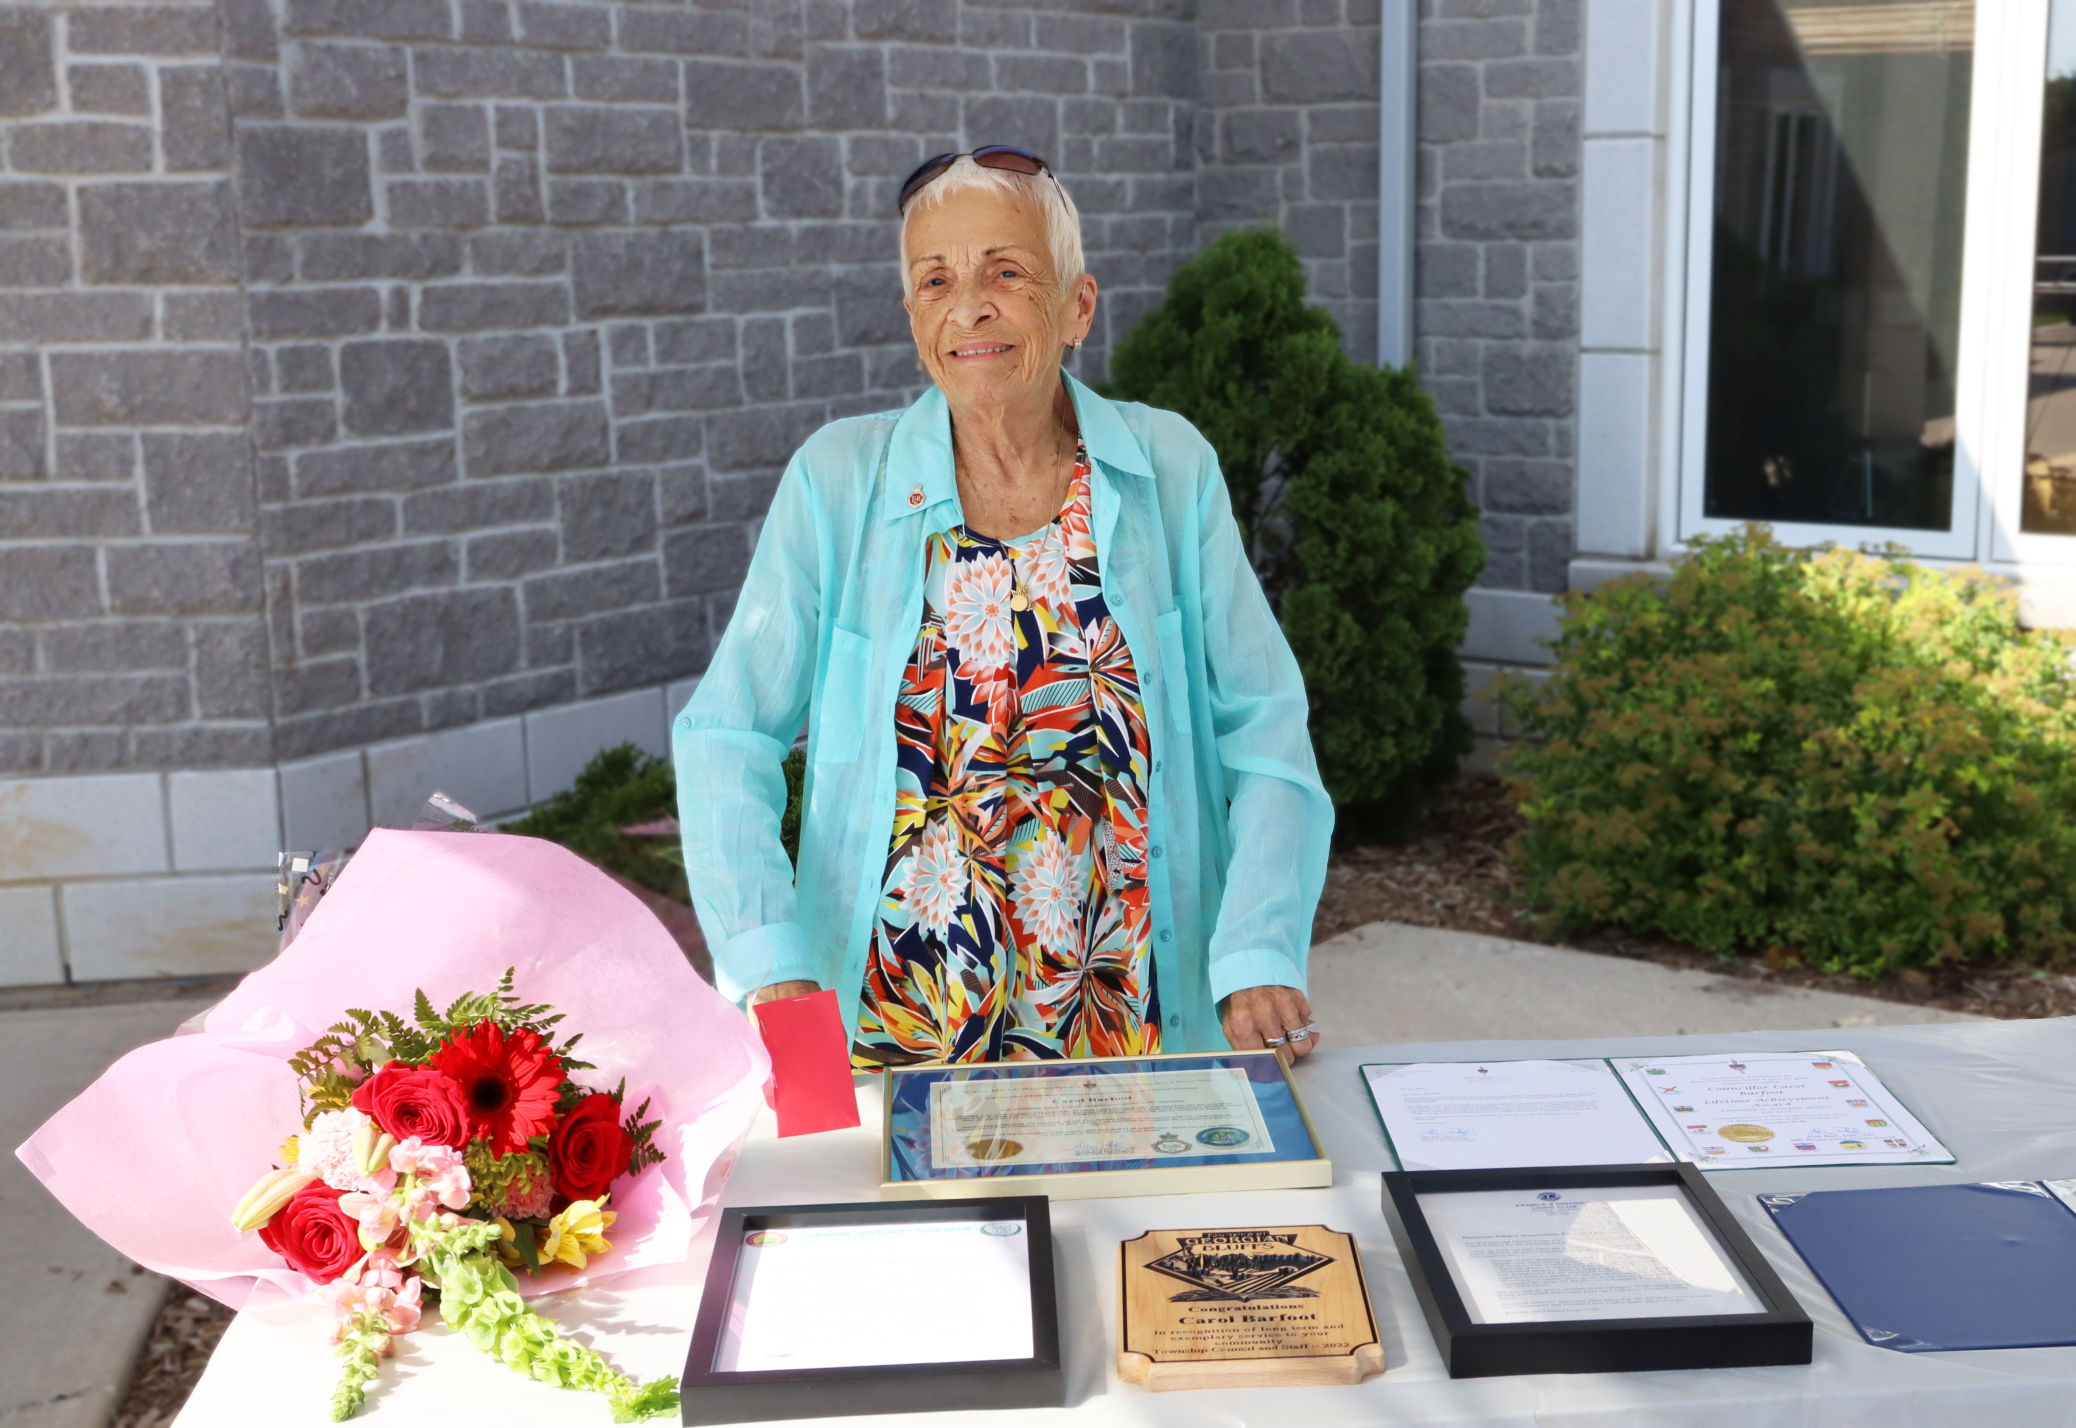 township honours passing of longtime local councillor